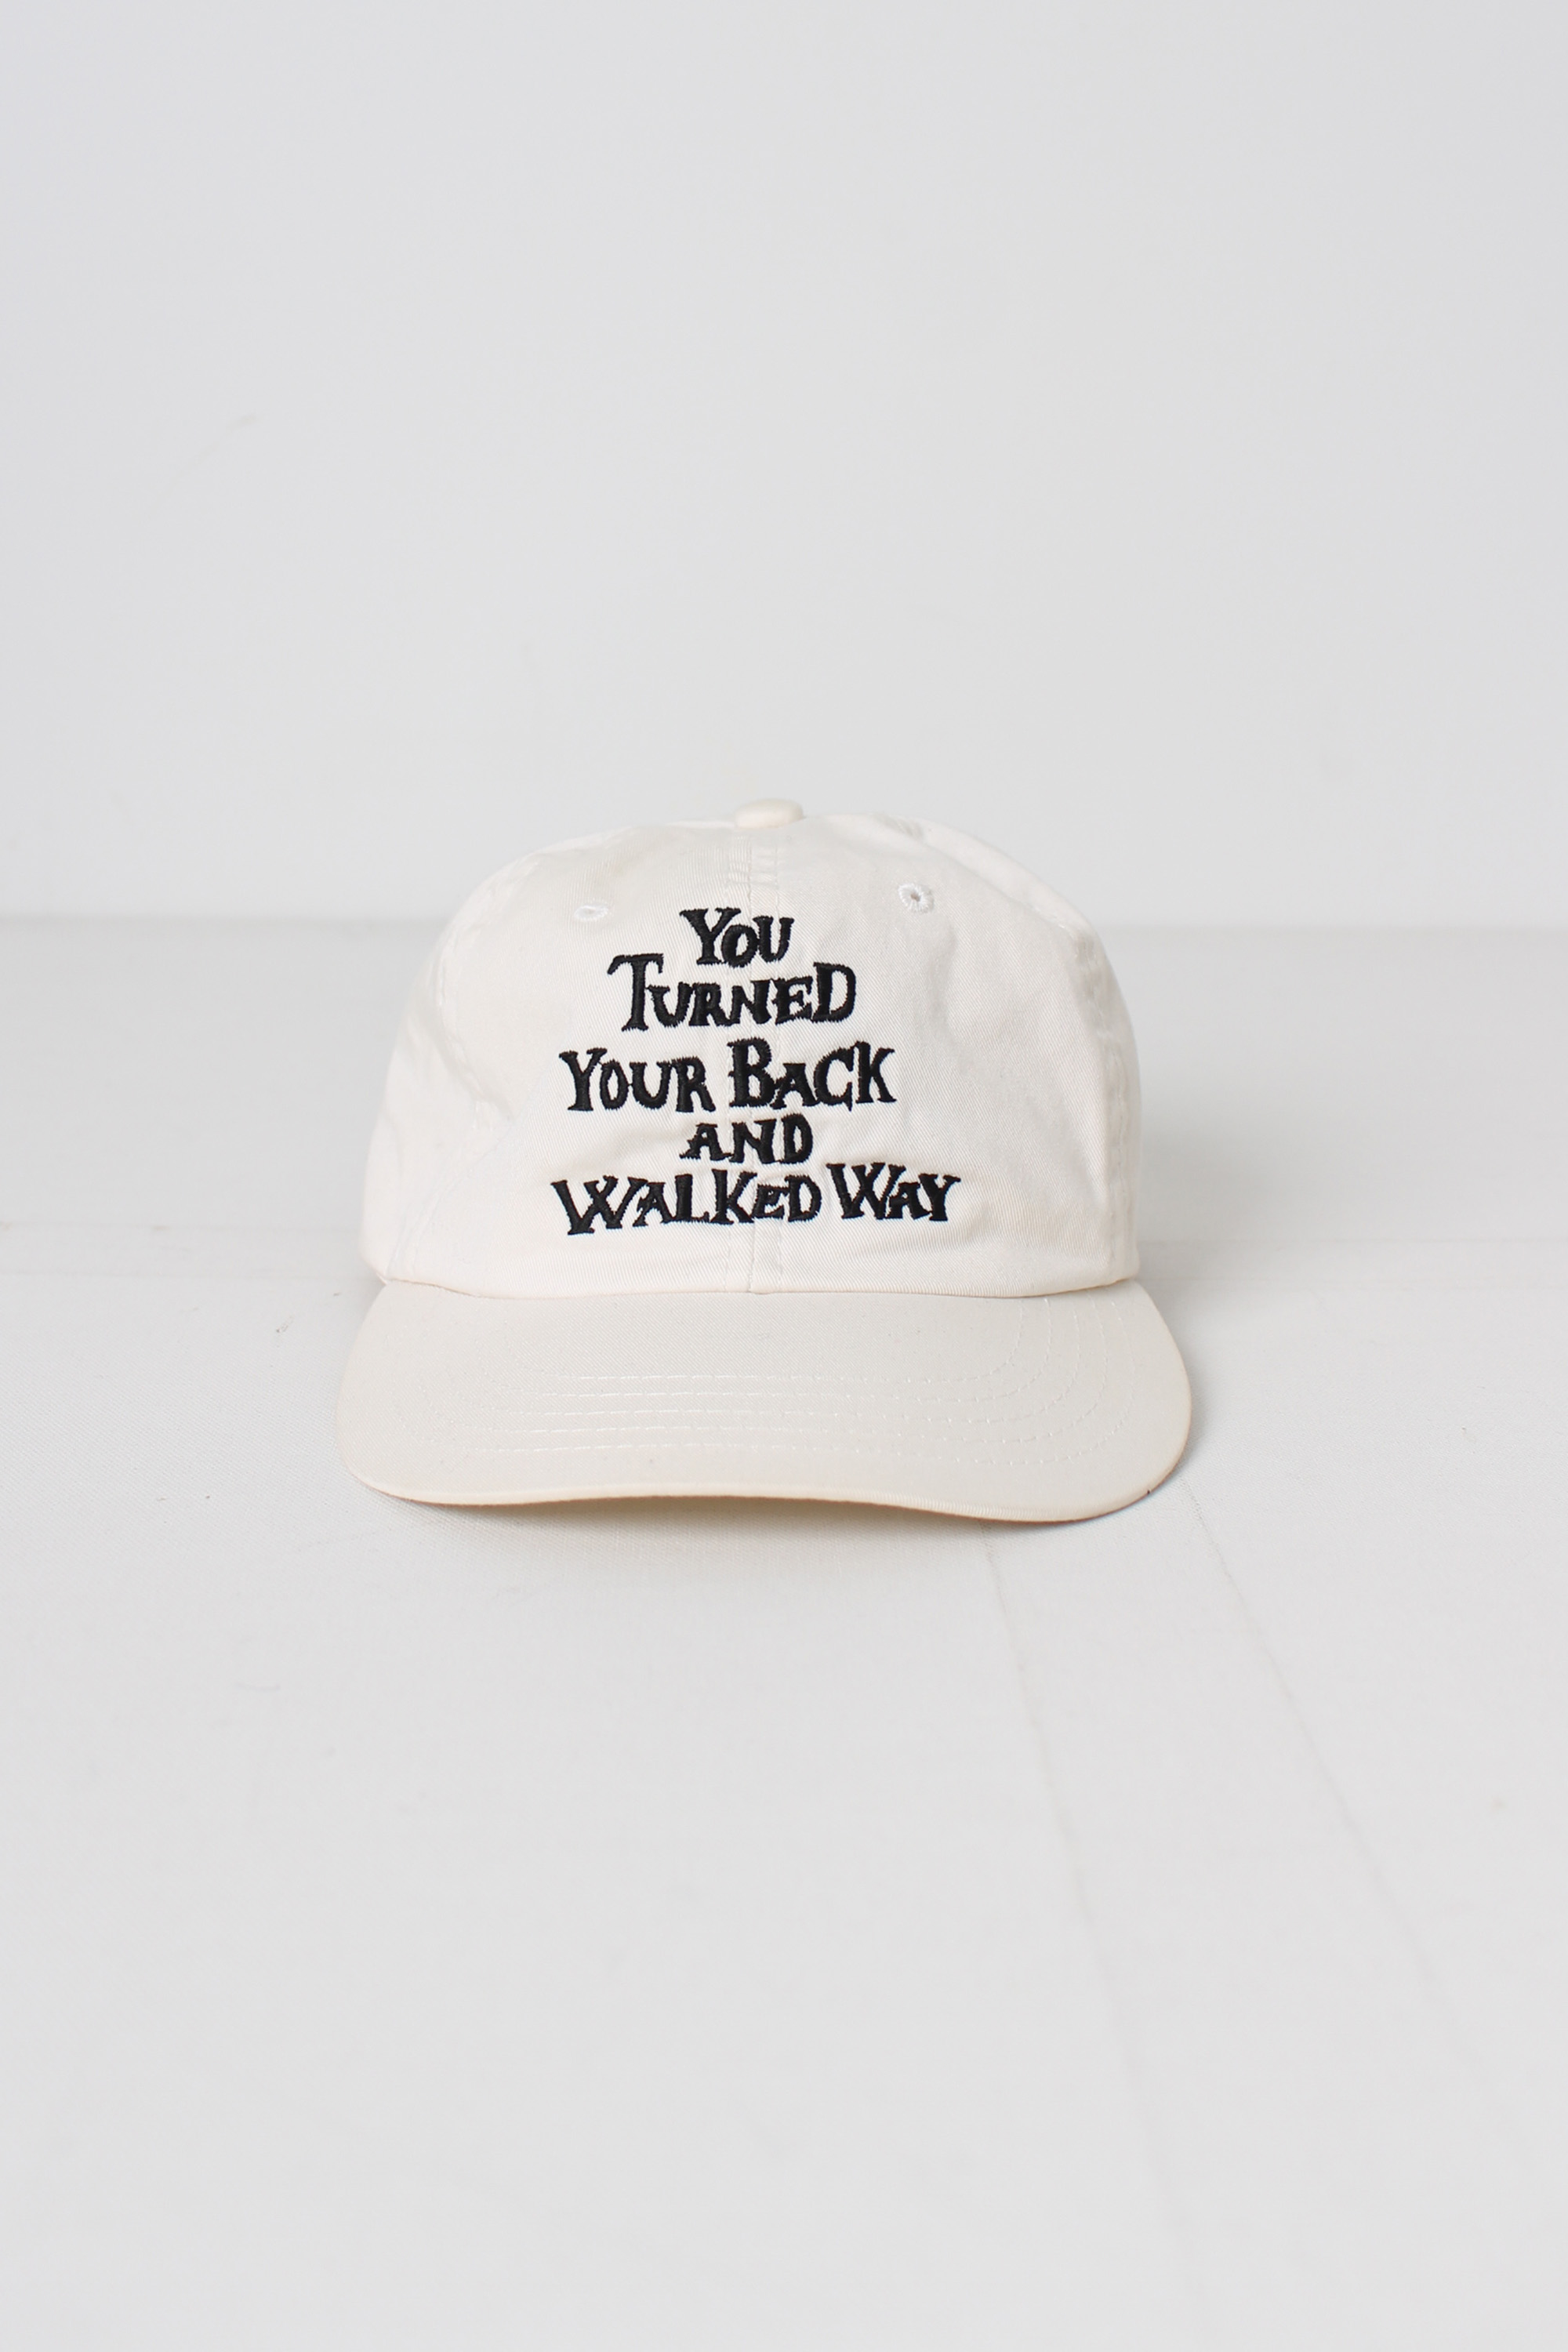 Hysteric Glamour 6 panel cap